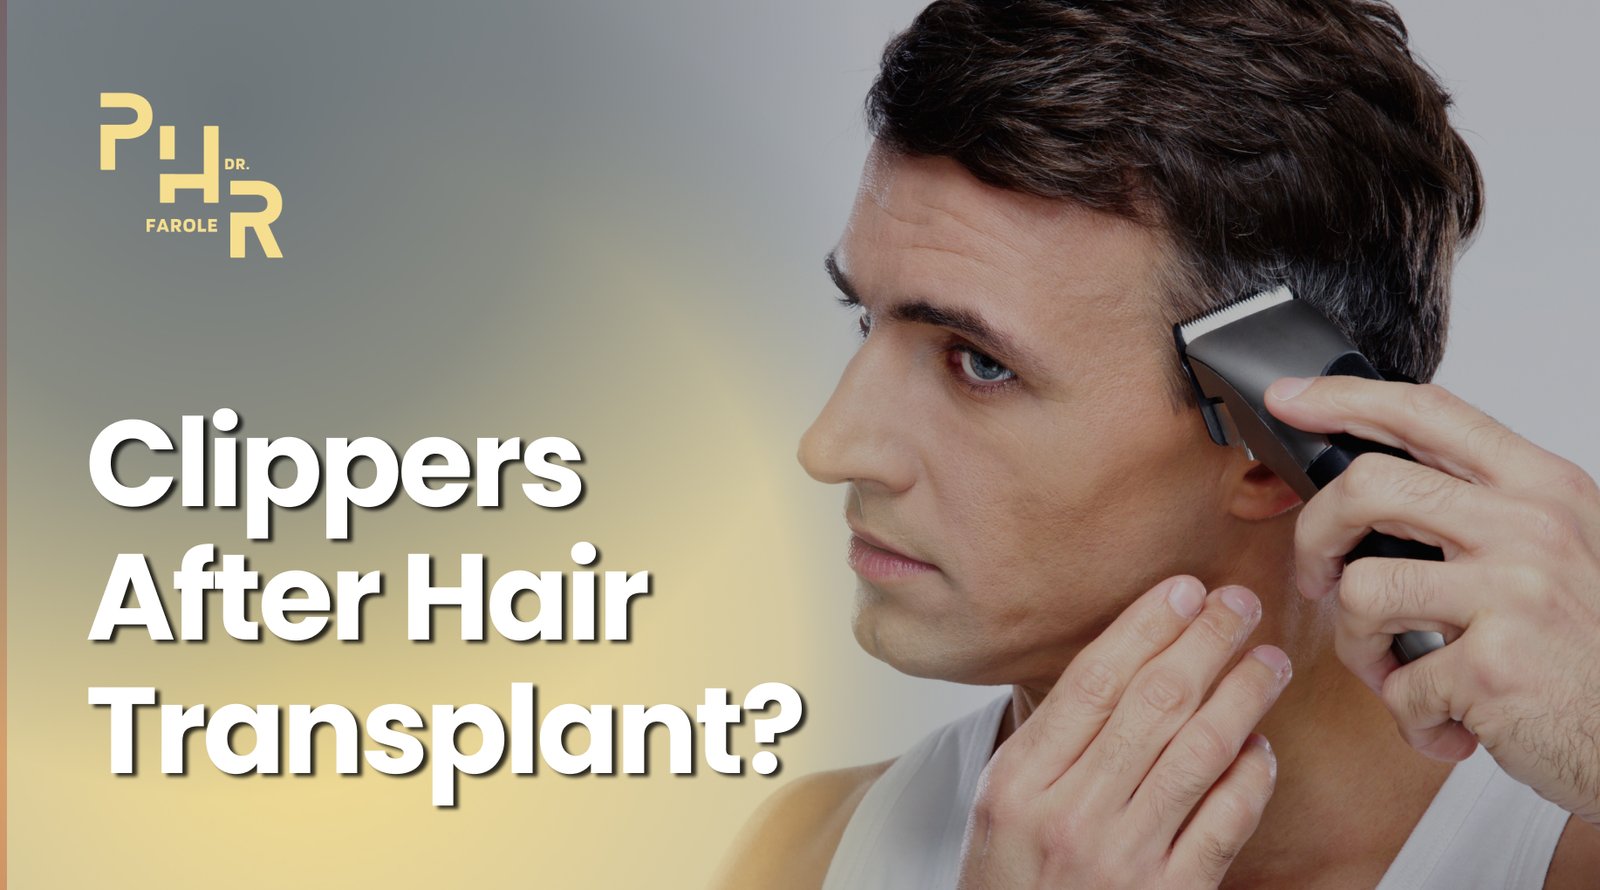 When Can You Use Clippers After A Hair Transplant?